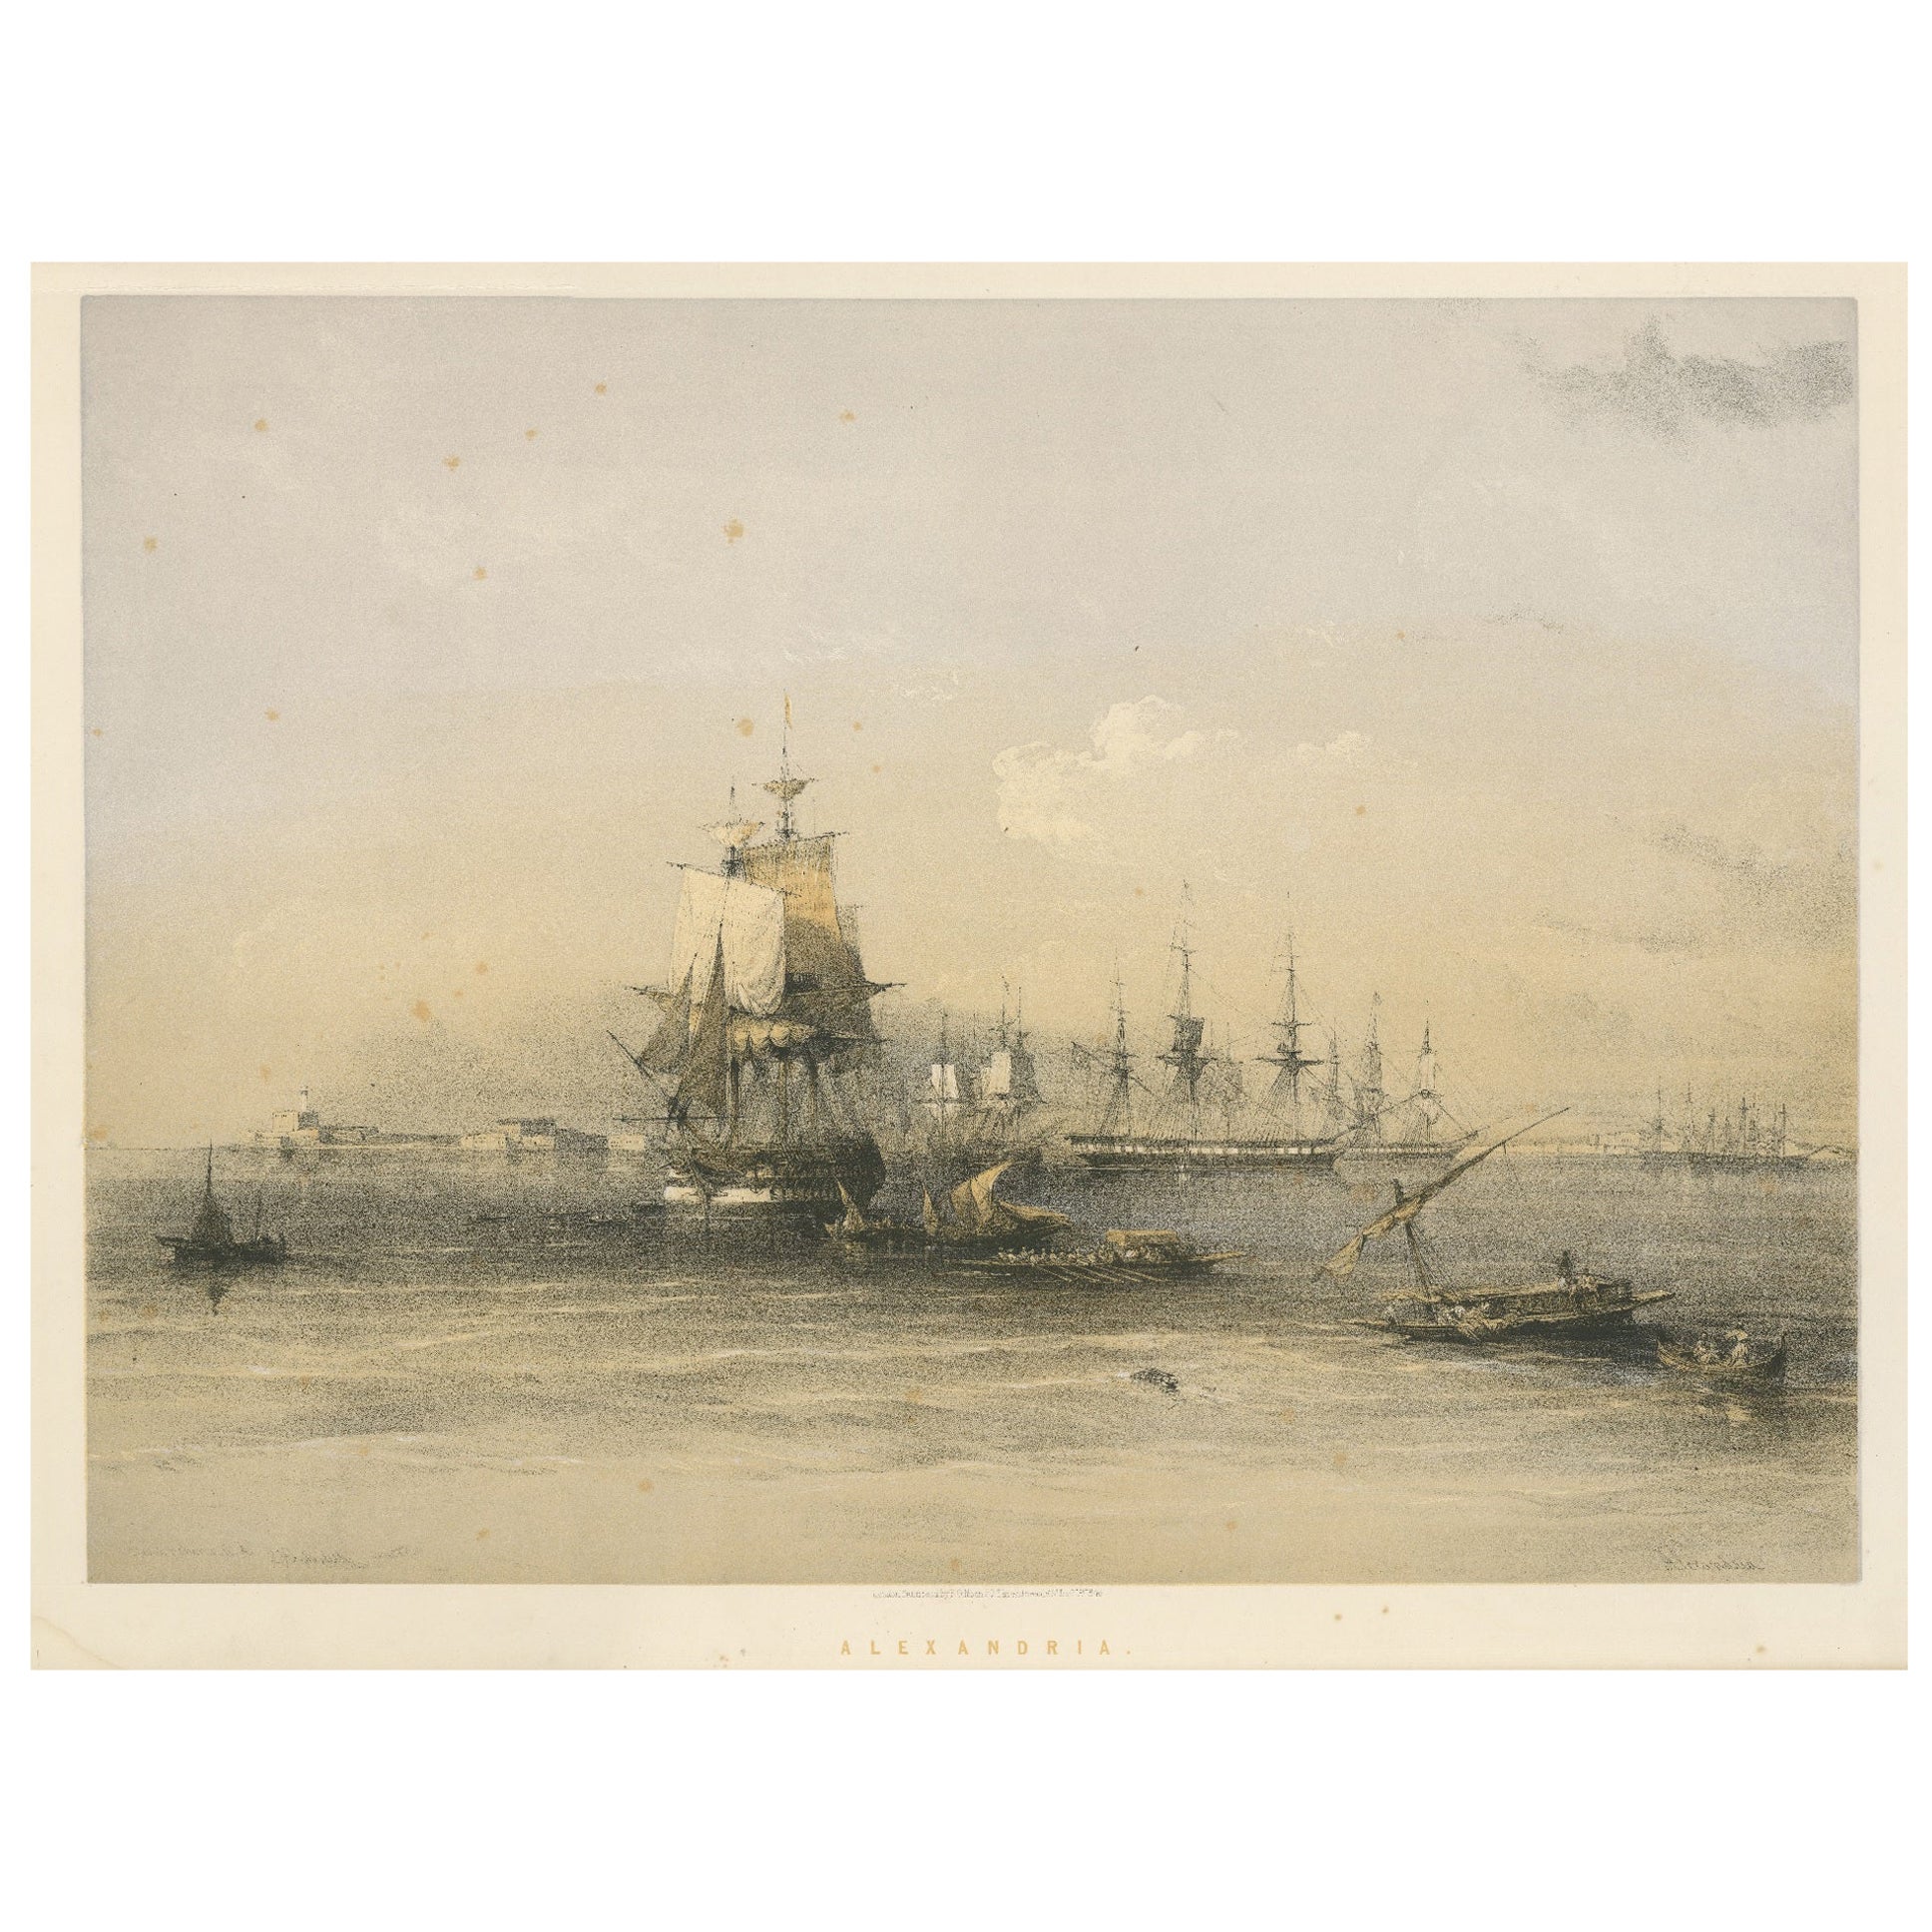 Tinted lithograph with a view of Alexandria, Egypt